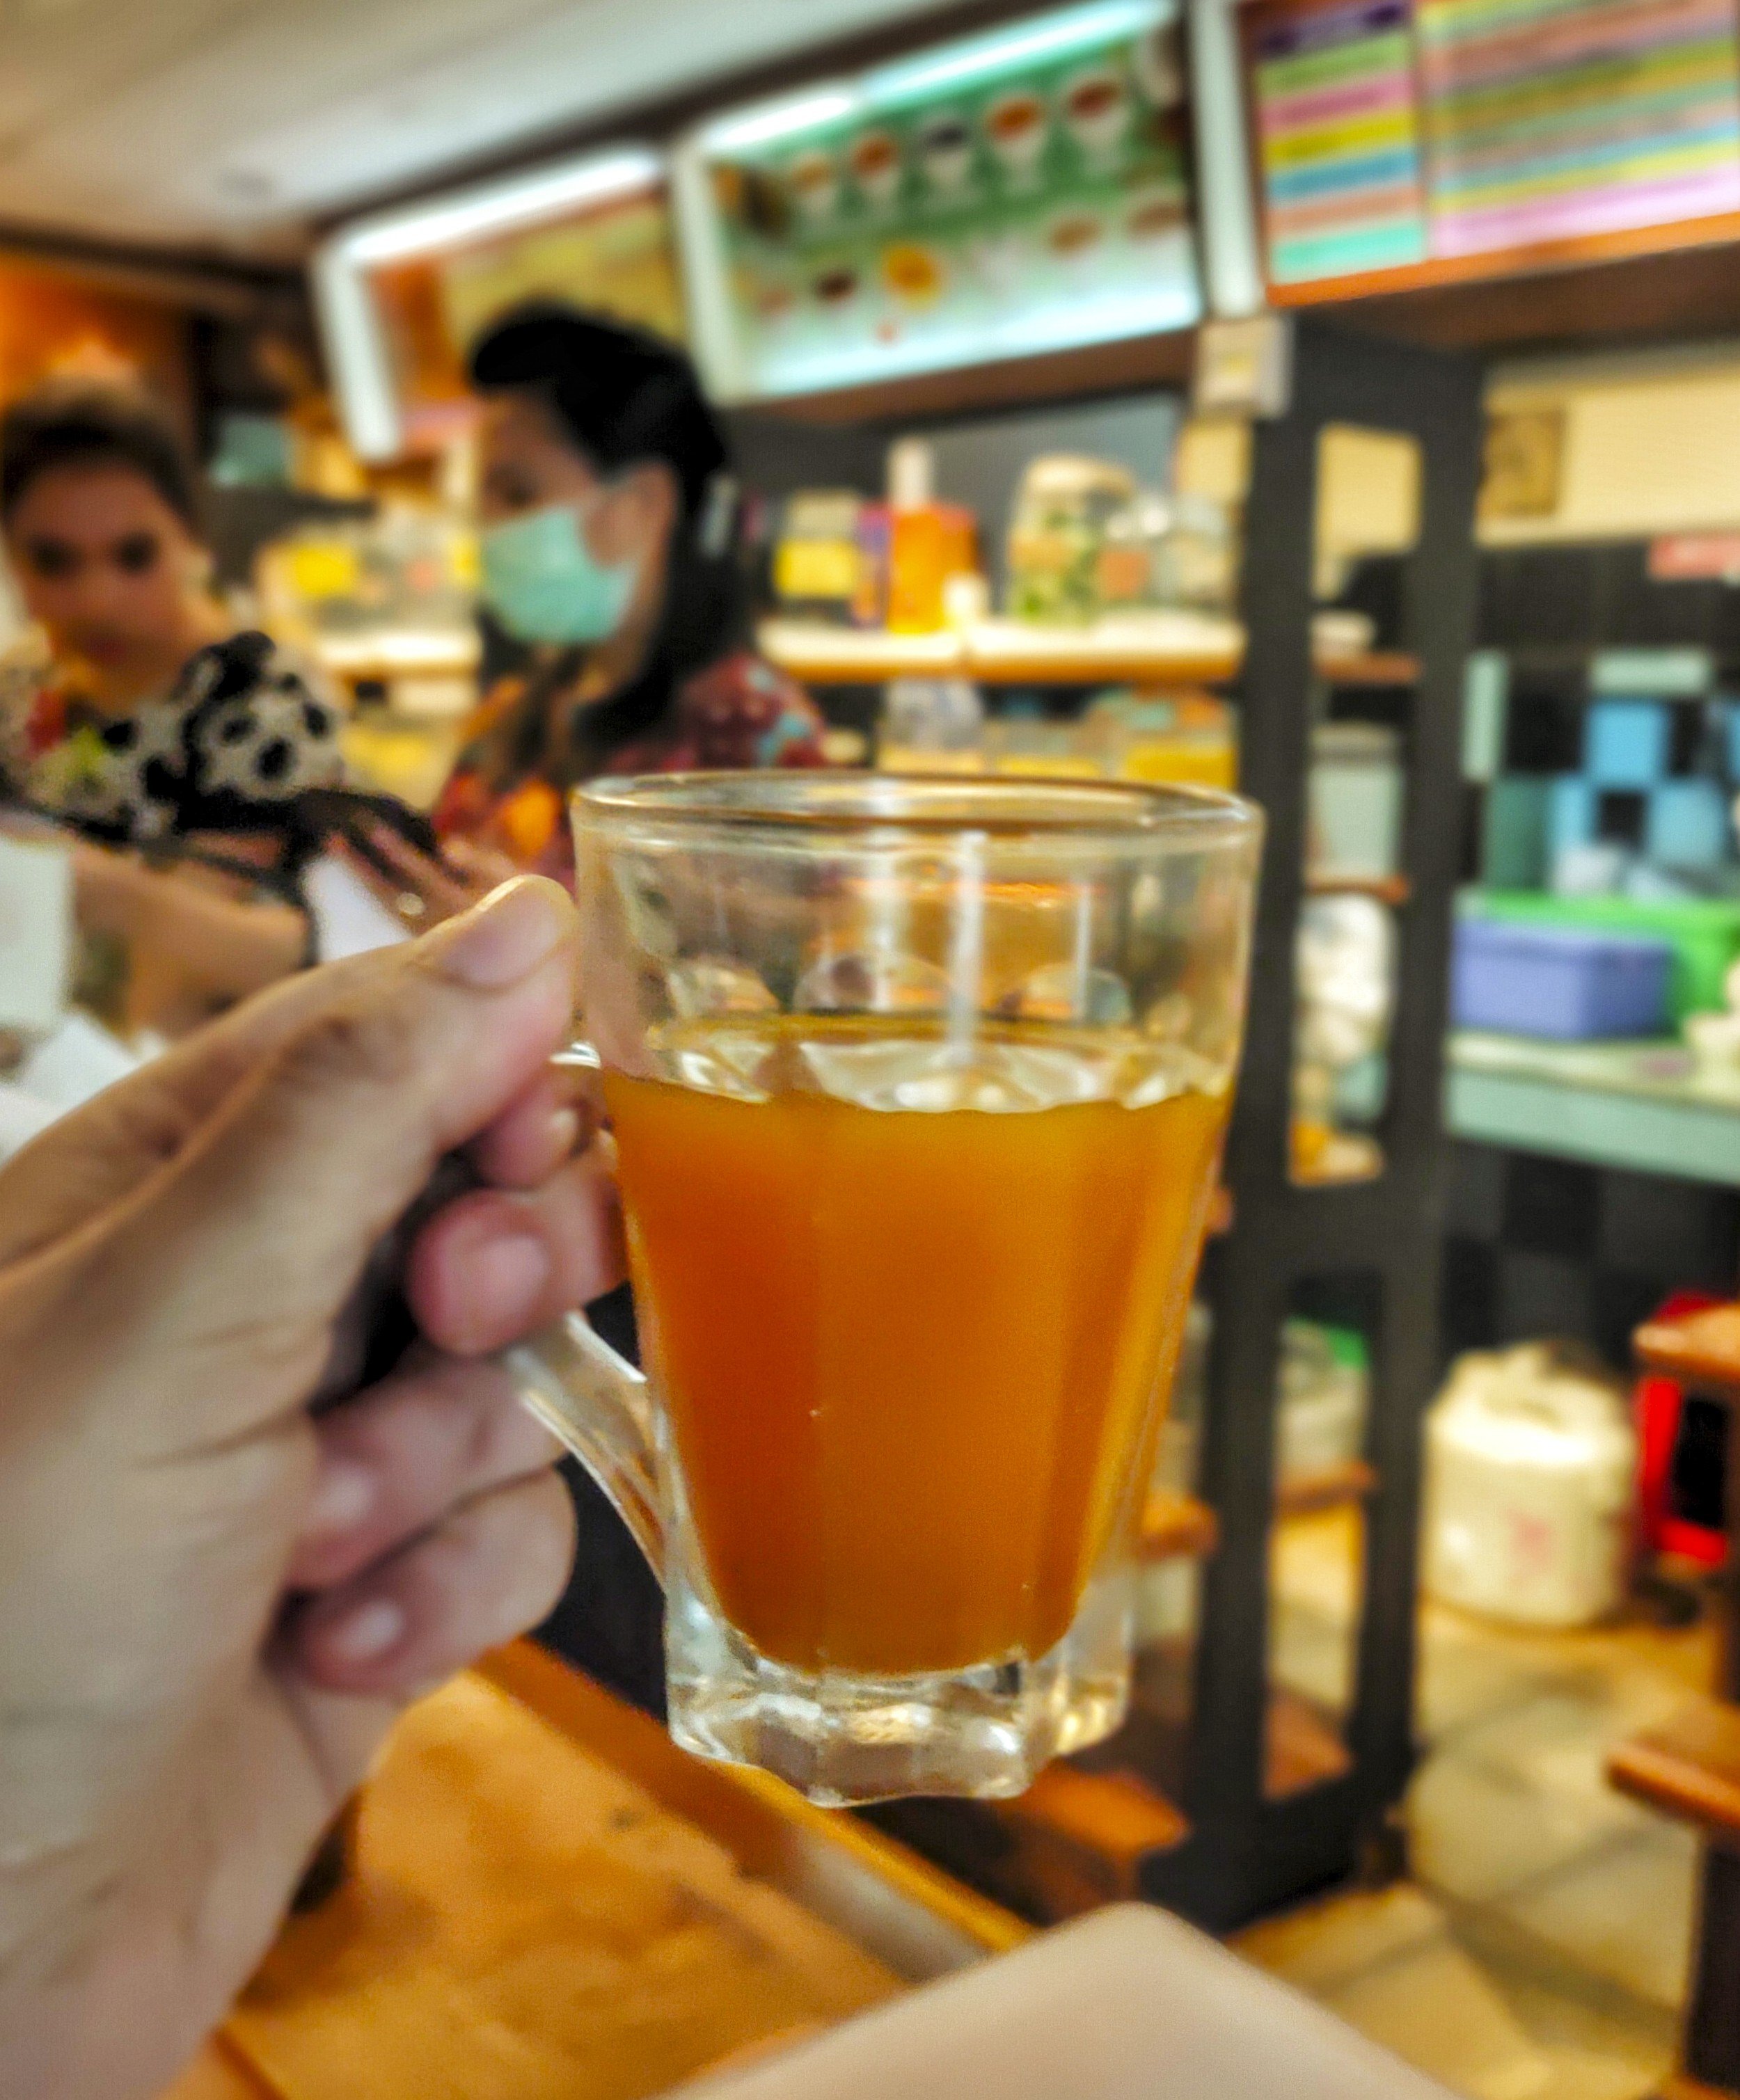 Jamu Empon-Empon.jpeg in Jakarta, Indonesia, March 21, 2020. For centuries, Indonesian people have believed that the traditional herbal drink jamu prevents and cures ailments from premenstrual syndromes to tumours and cancers. And at a time of widespread infections by coronavirus, people have been returning to these long-established concoctions in the hope of improving their immunity. 21MAR20 [28MARCH2020 TRAVEL FEATURES] CREDIT: SYLVIANA HAMDANI